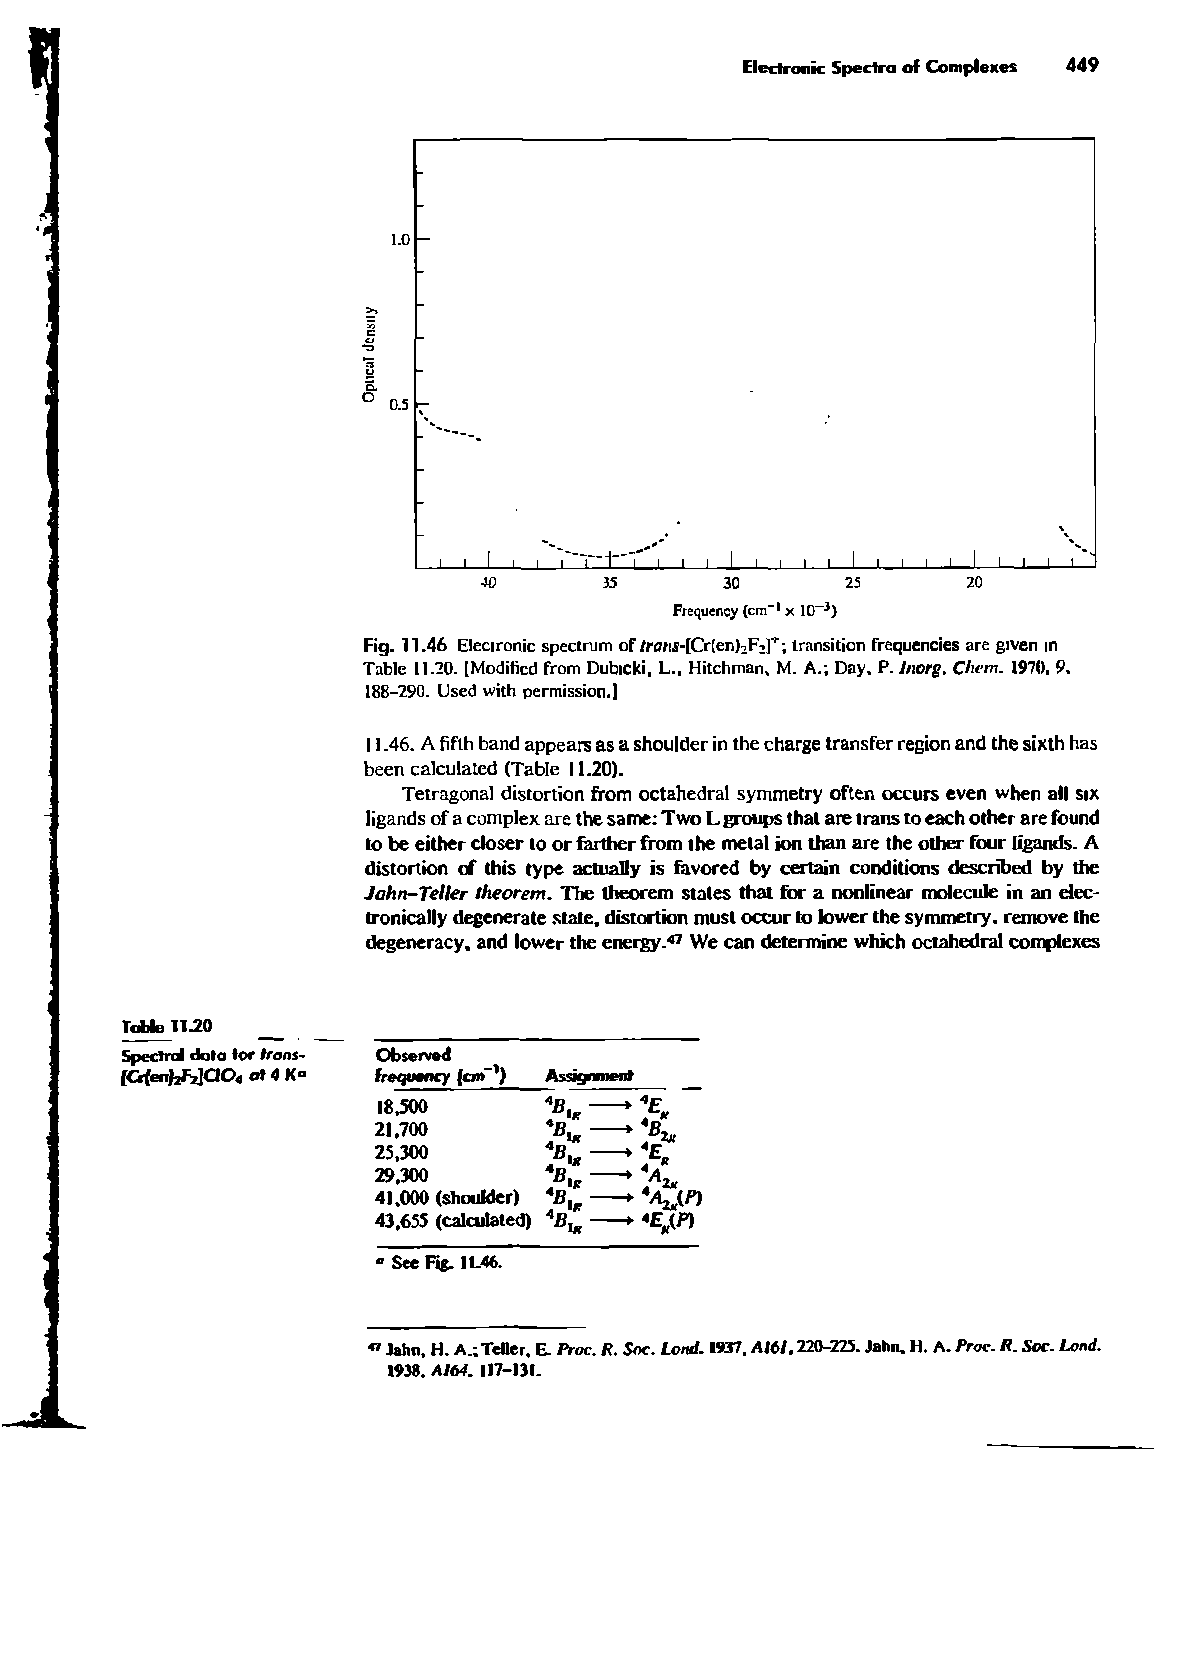 Fig. 11.46 Electronic spectrum of /ronr-lCrtenhFj] transition frequencies are given in Table 11.20. [Modified from Dubicki, L., Hitchman. M. A. Day. P. hiorg. Chem. 1970, 9. 188-290. Used with permission.]...